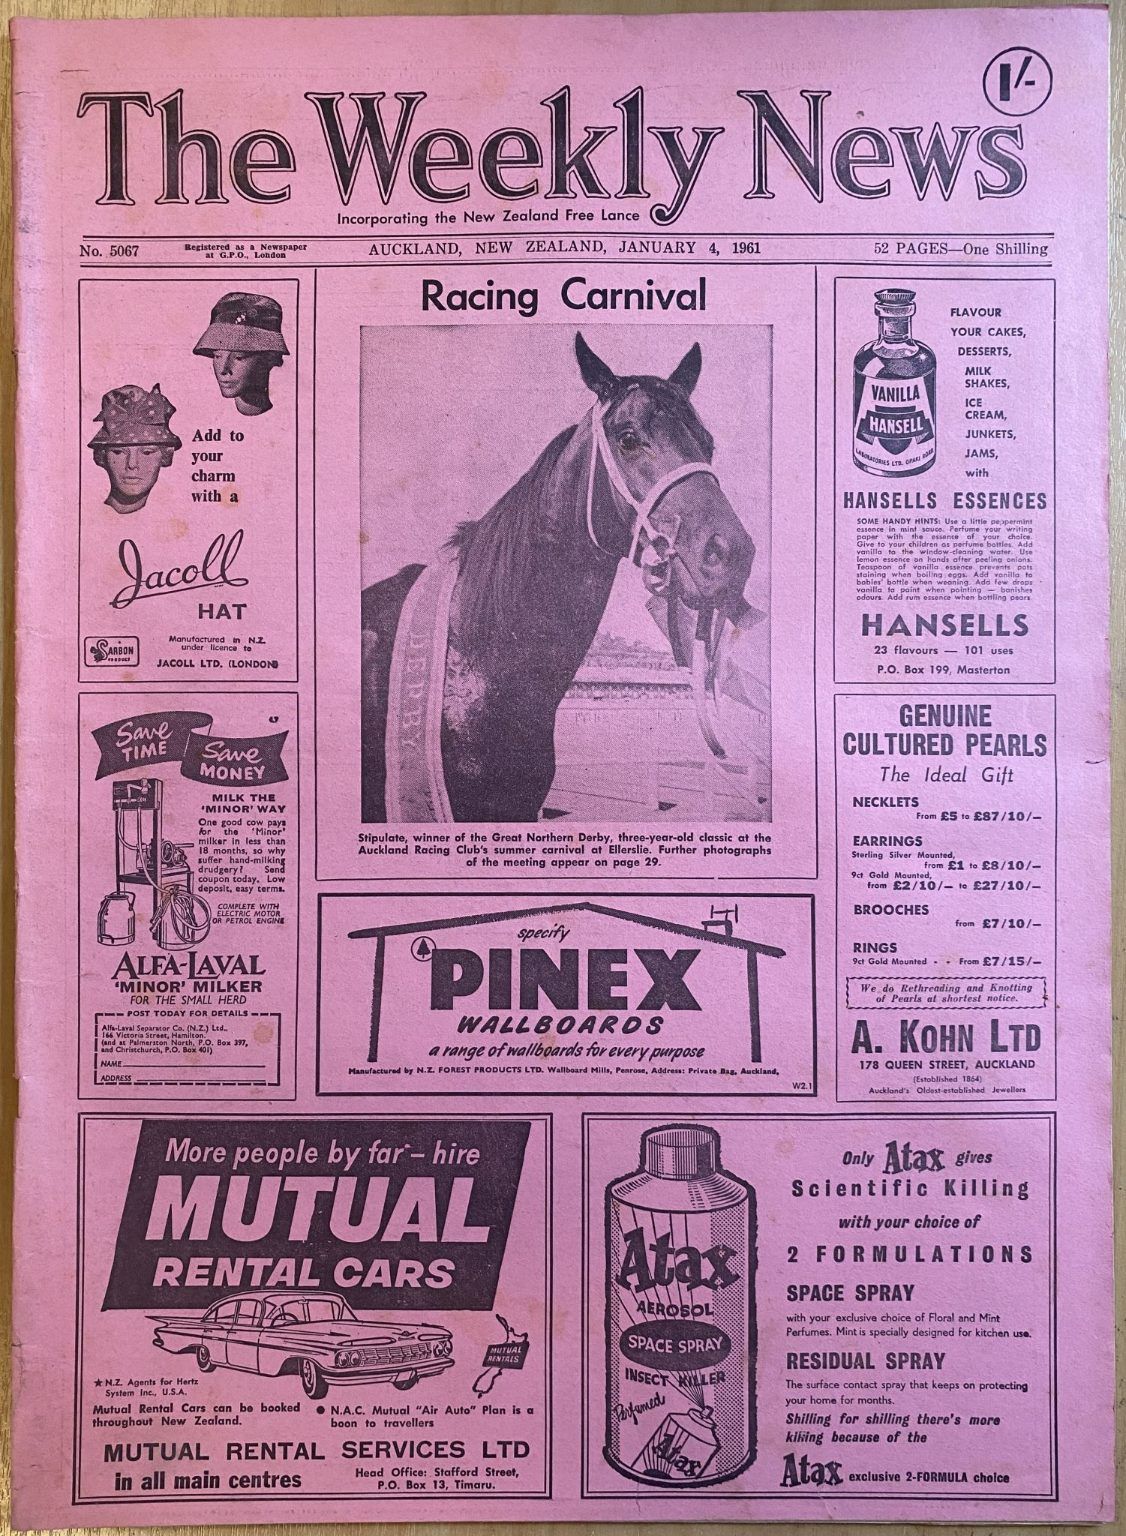 OLD NEWSPAPER: The Weekly News, No. 5067, 4 January 1961